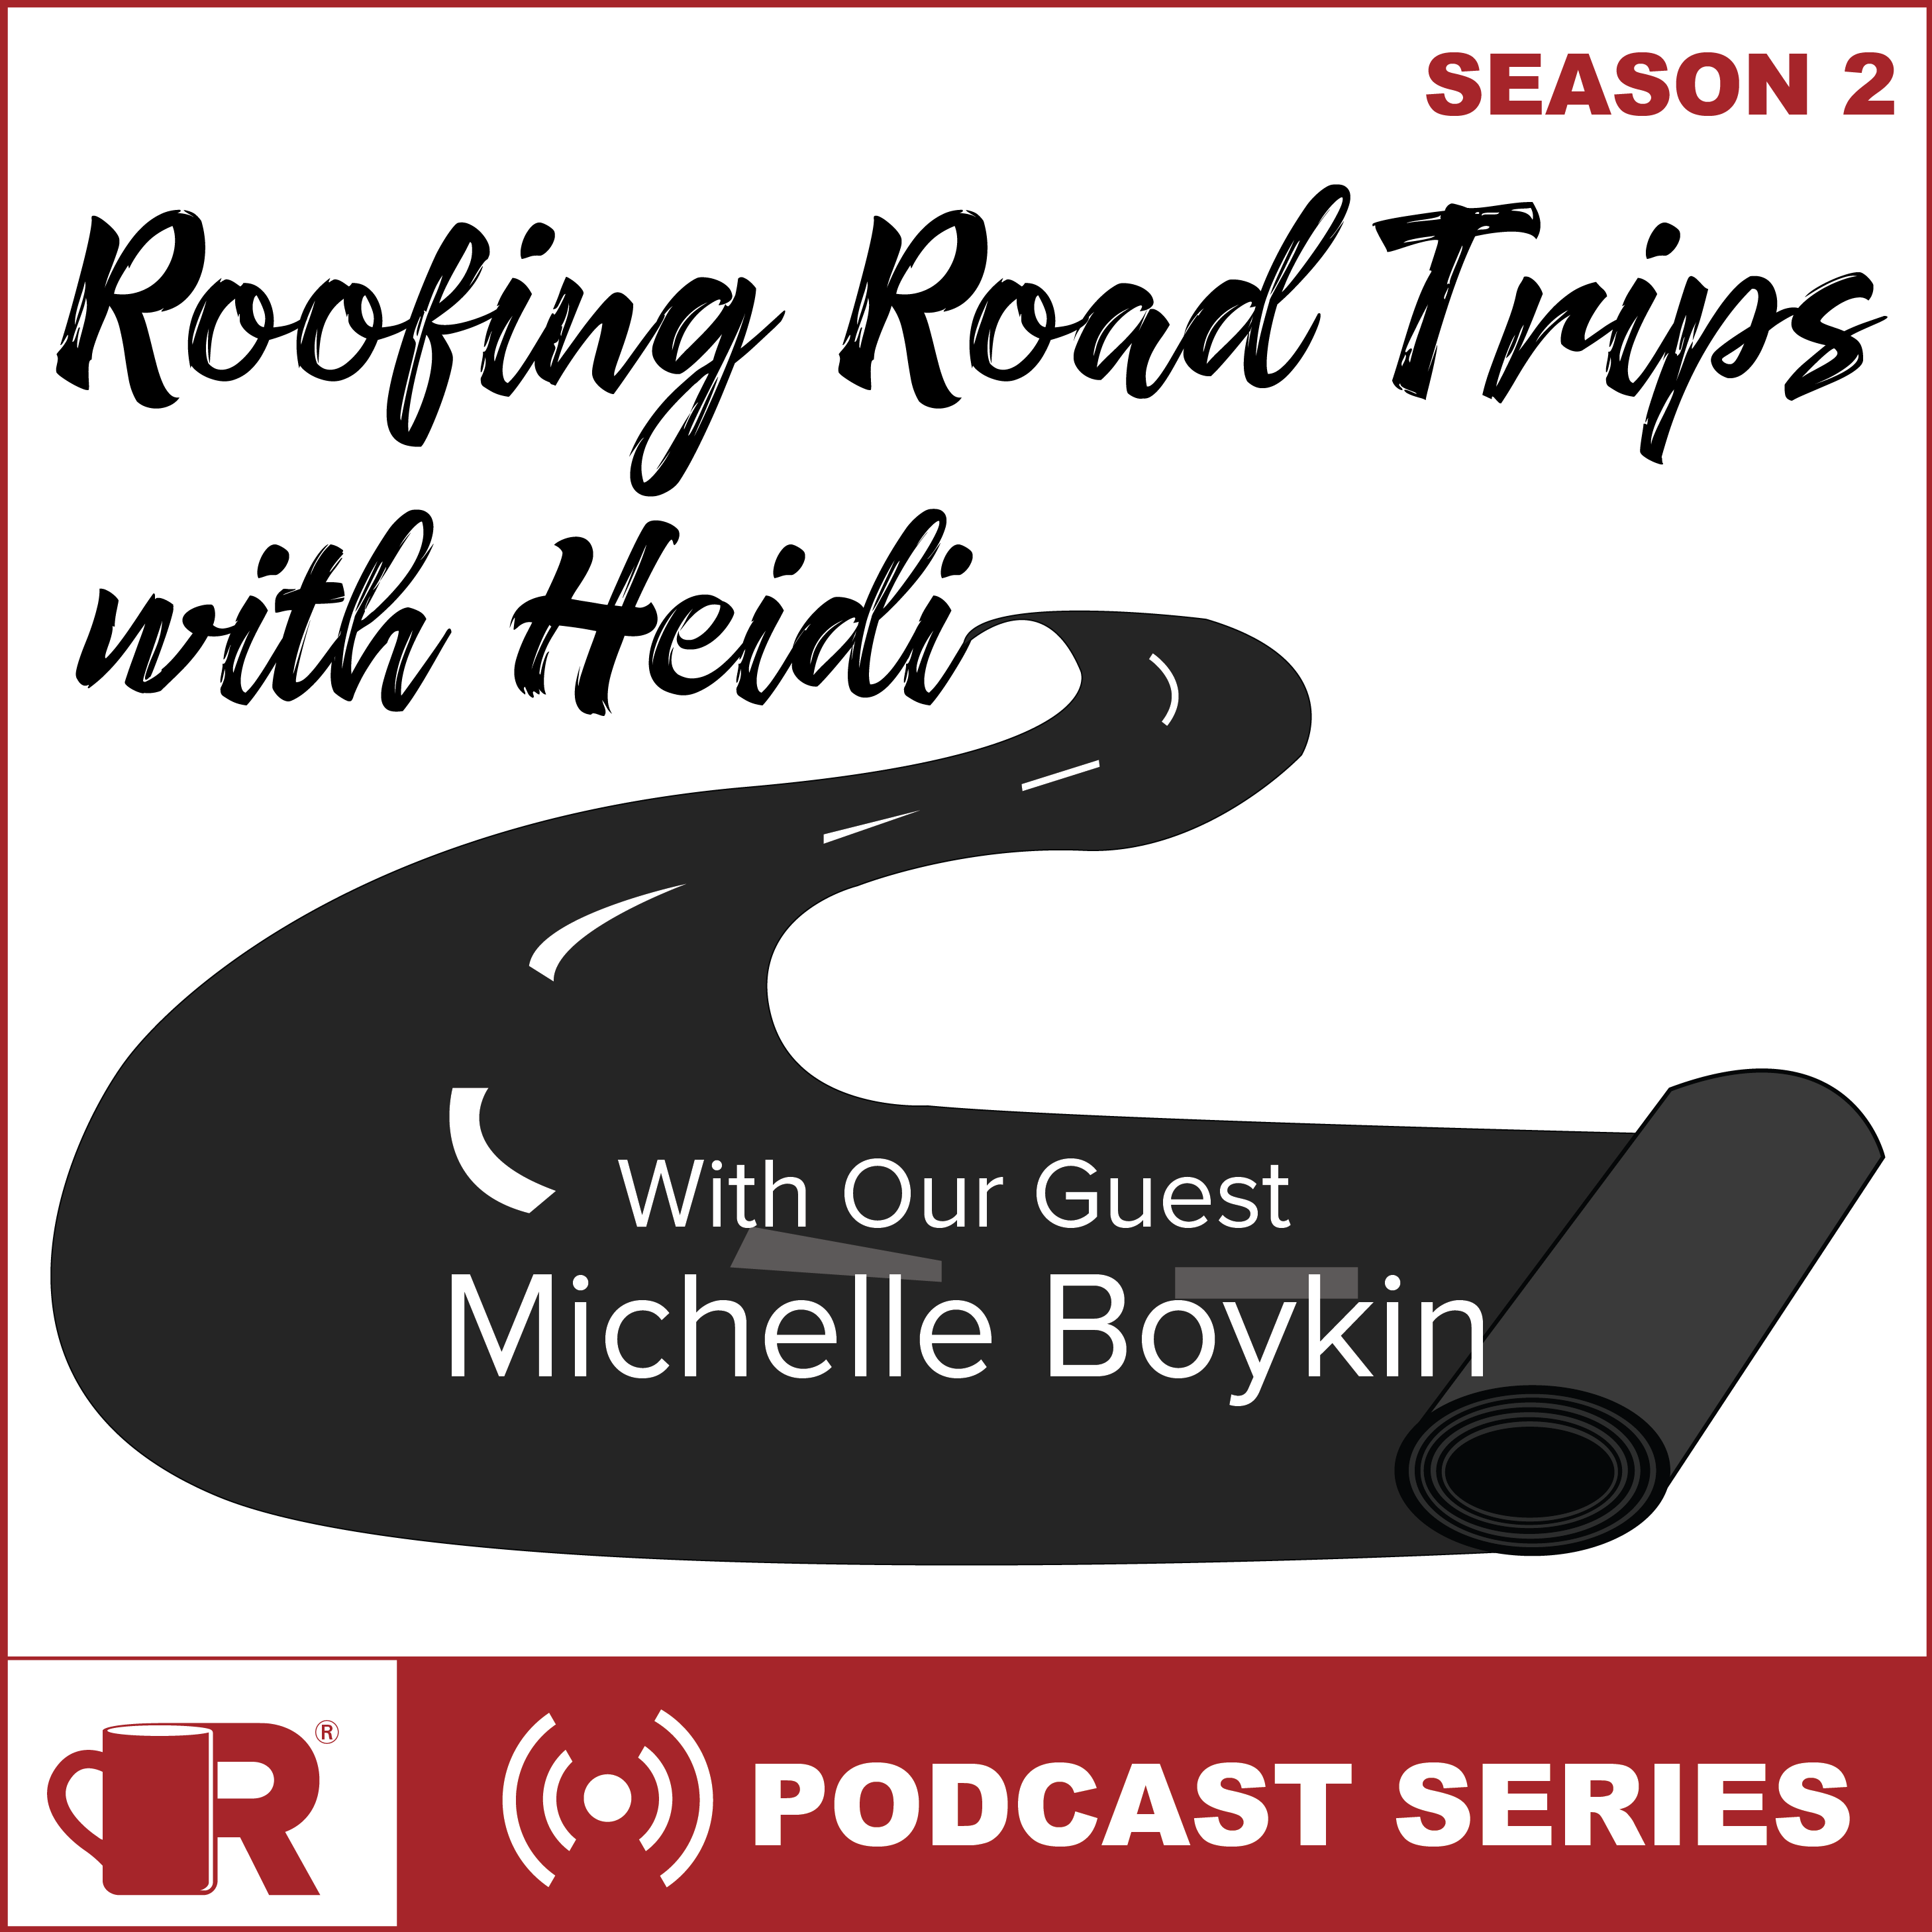 Roofing Road Trips with Heidi- Michelle Boykin